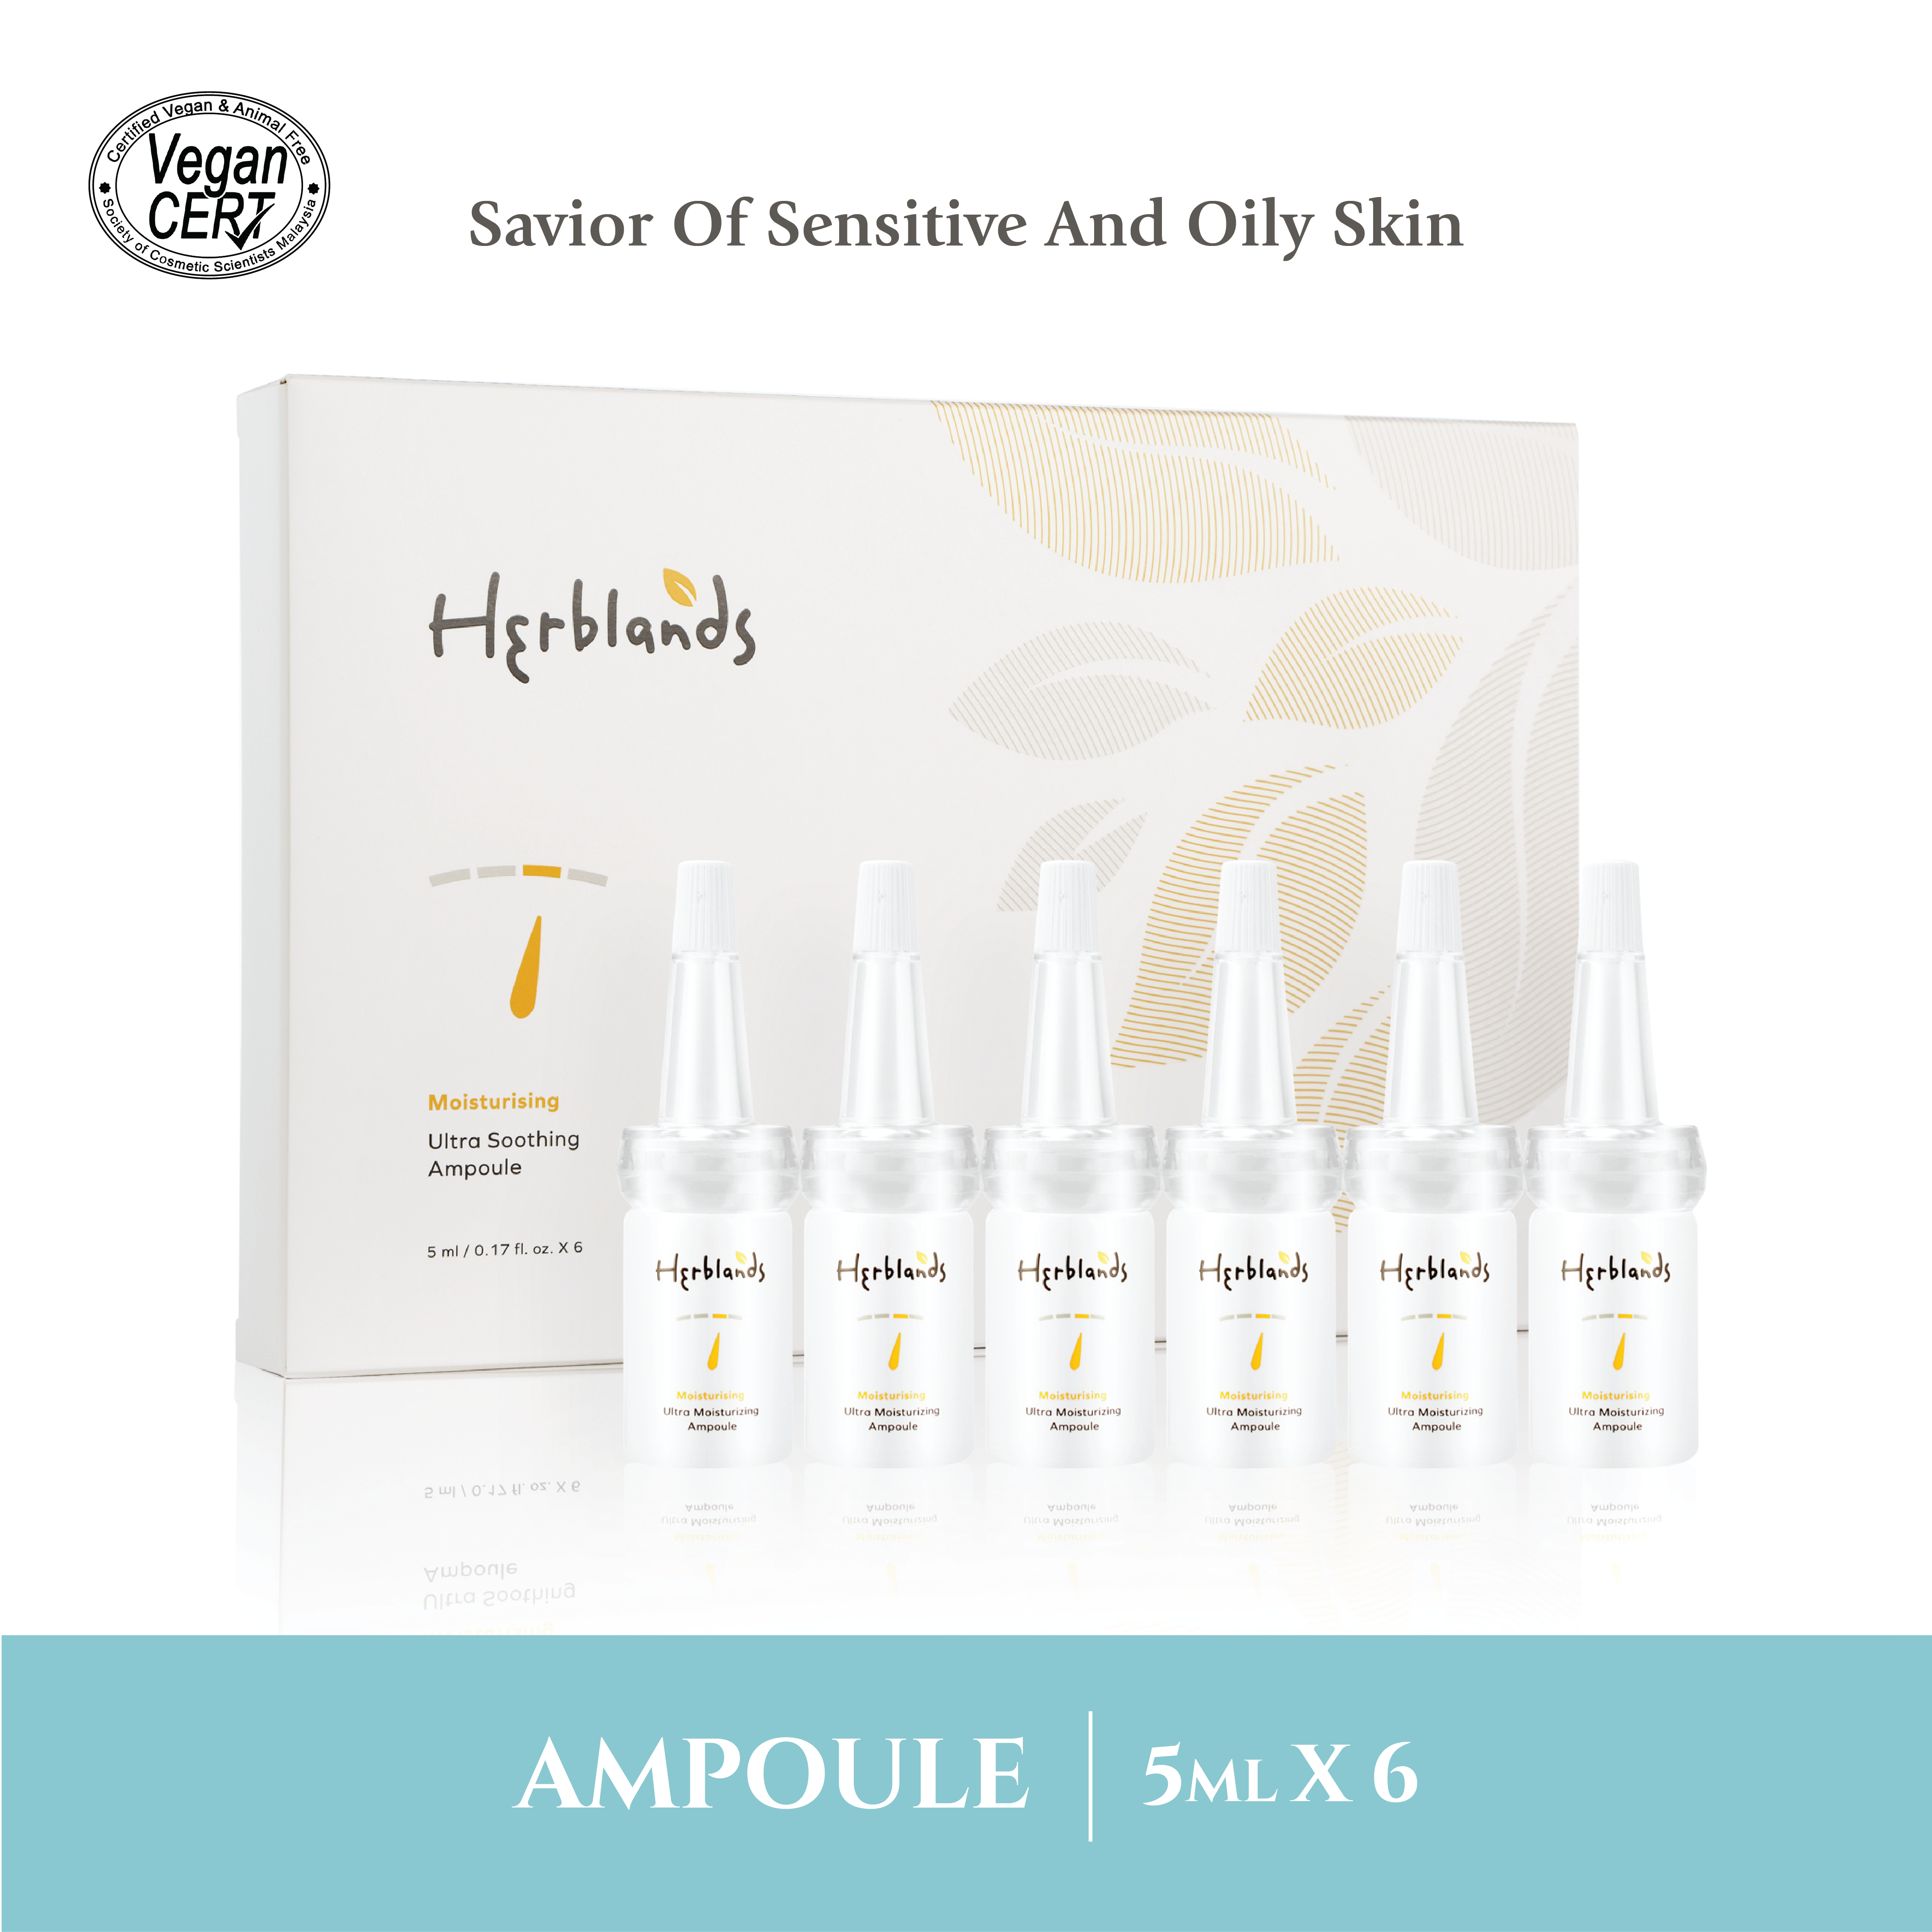 Herblands Moisturising Ultra Soothing Ampoule (5ml) (Pack of 6)